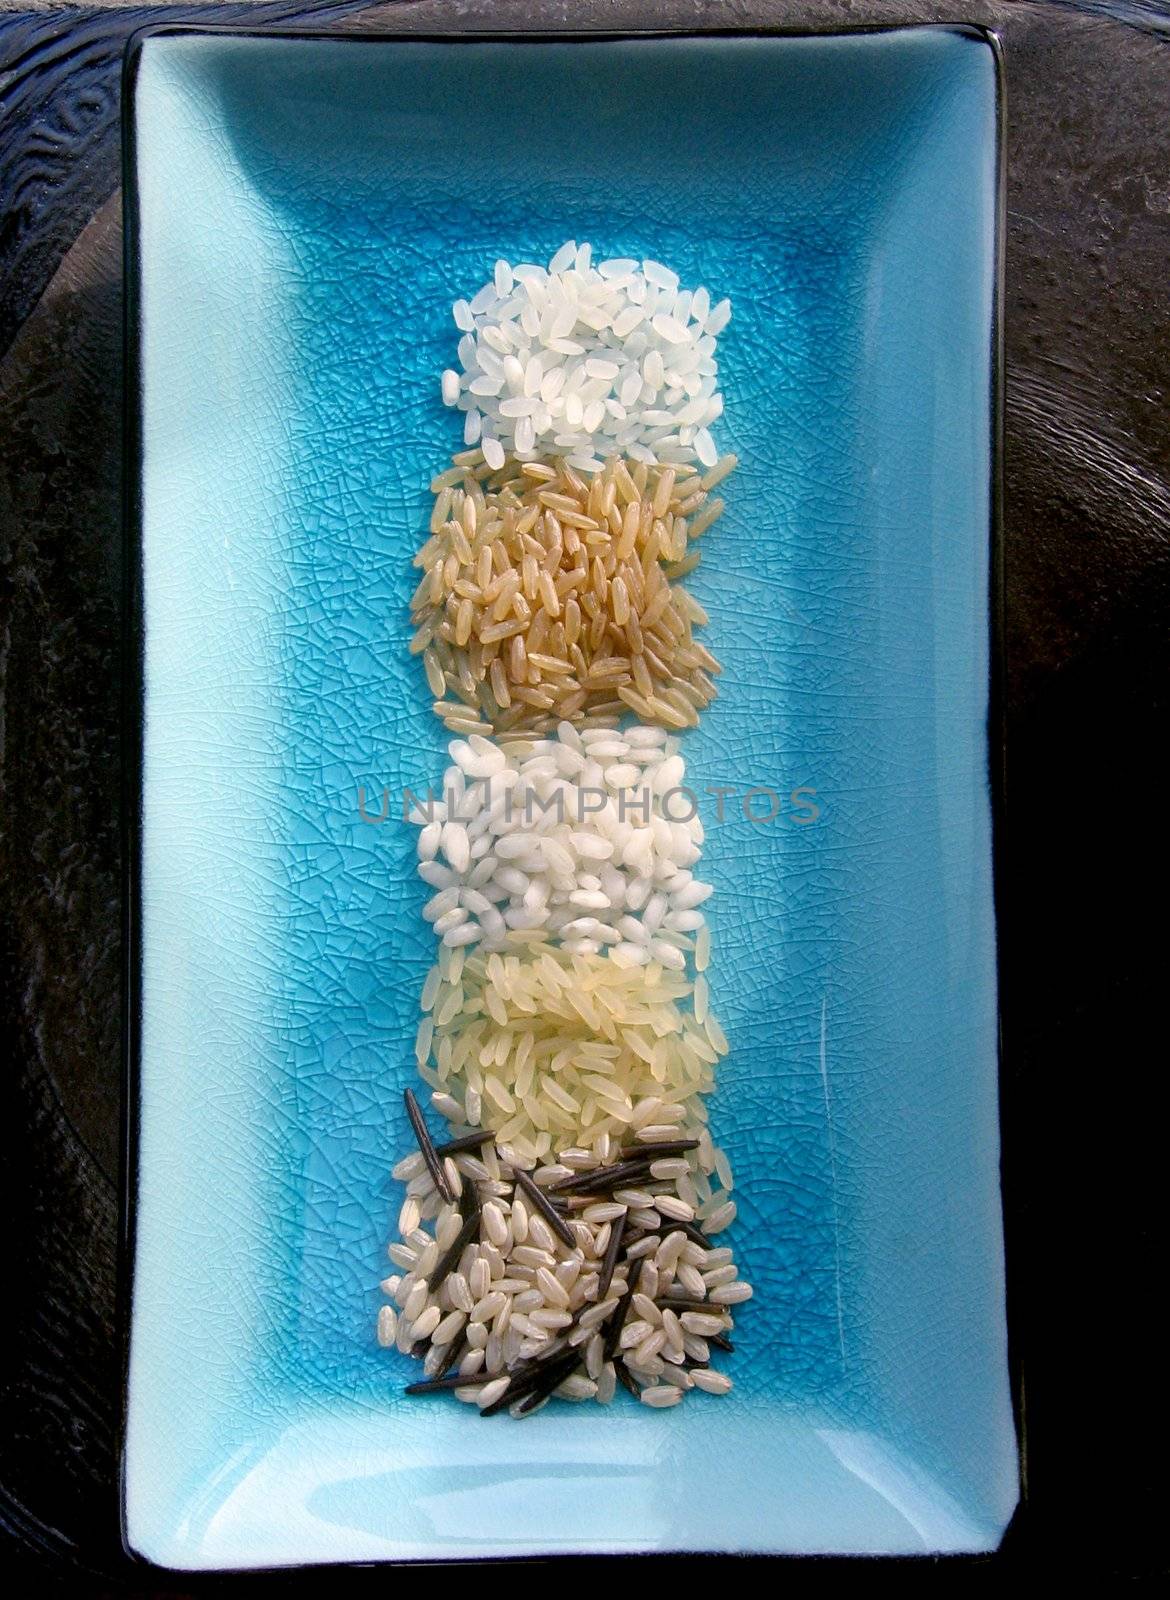 Different kinds of rice on a plate - sushi, wild, long grain, arborro, and brown